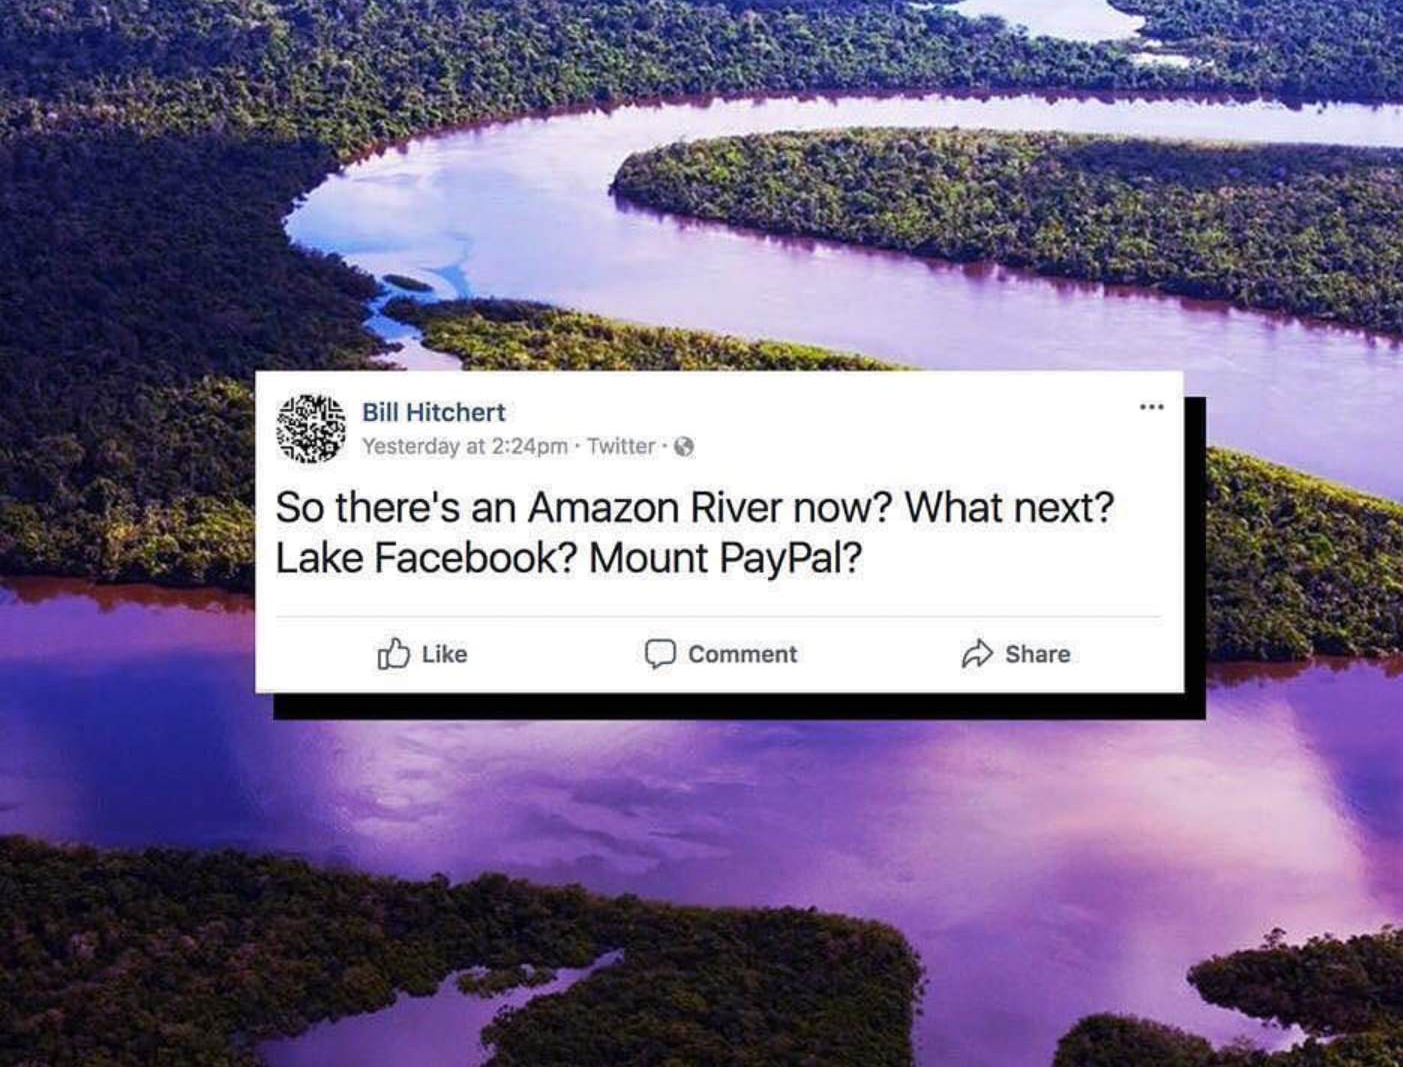 alexandria ocasio cortez amazon memes - A Bill Hitchert Yesterday at Twitter So there's an Amazon River now? What next? Lake Facebook? Mount PayPal? Comment